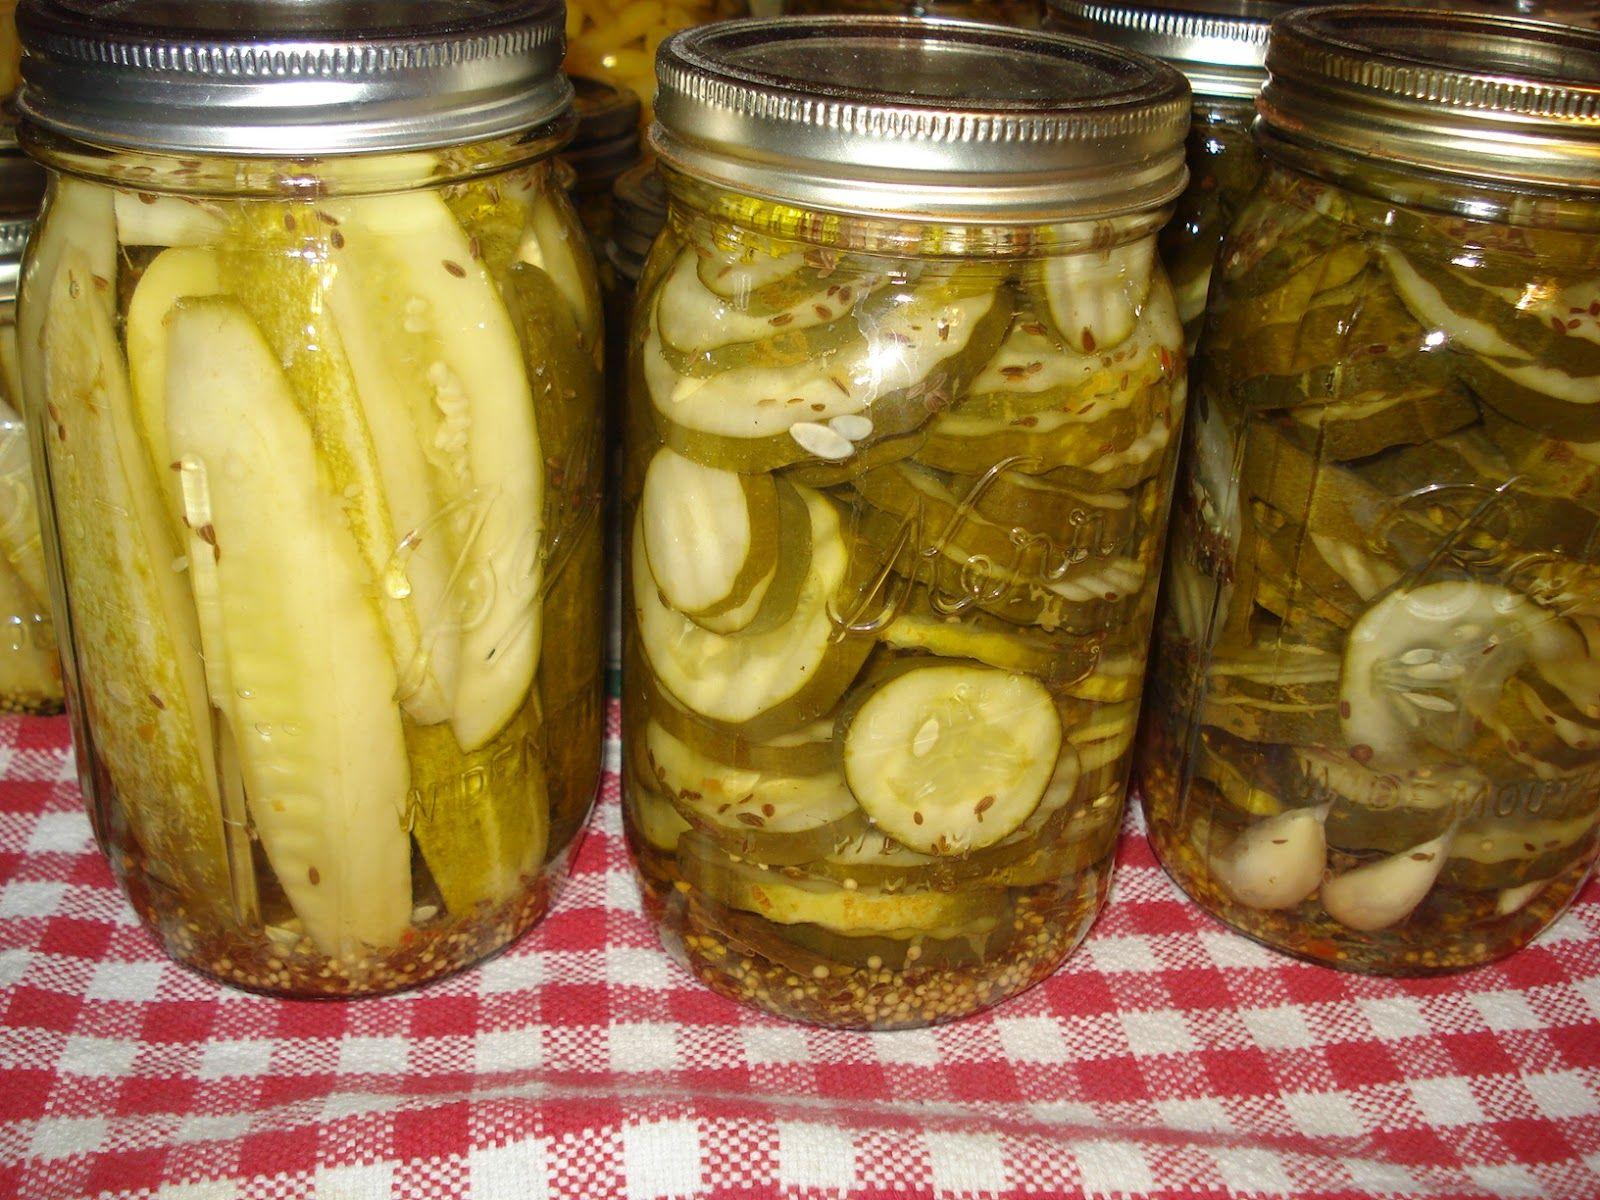 The Creative Home: Polish Dill Pickles